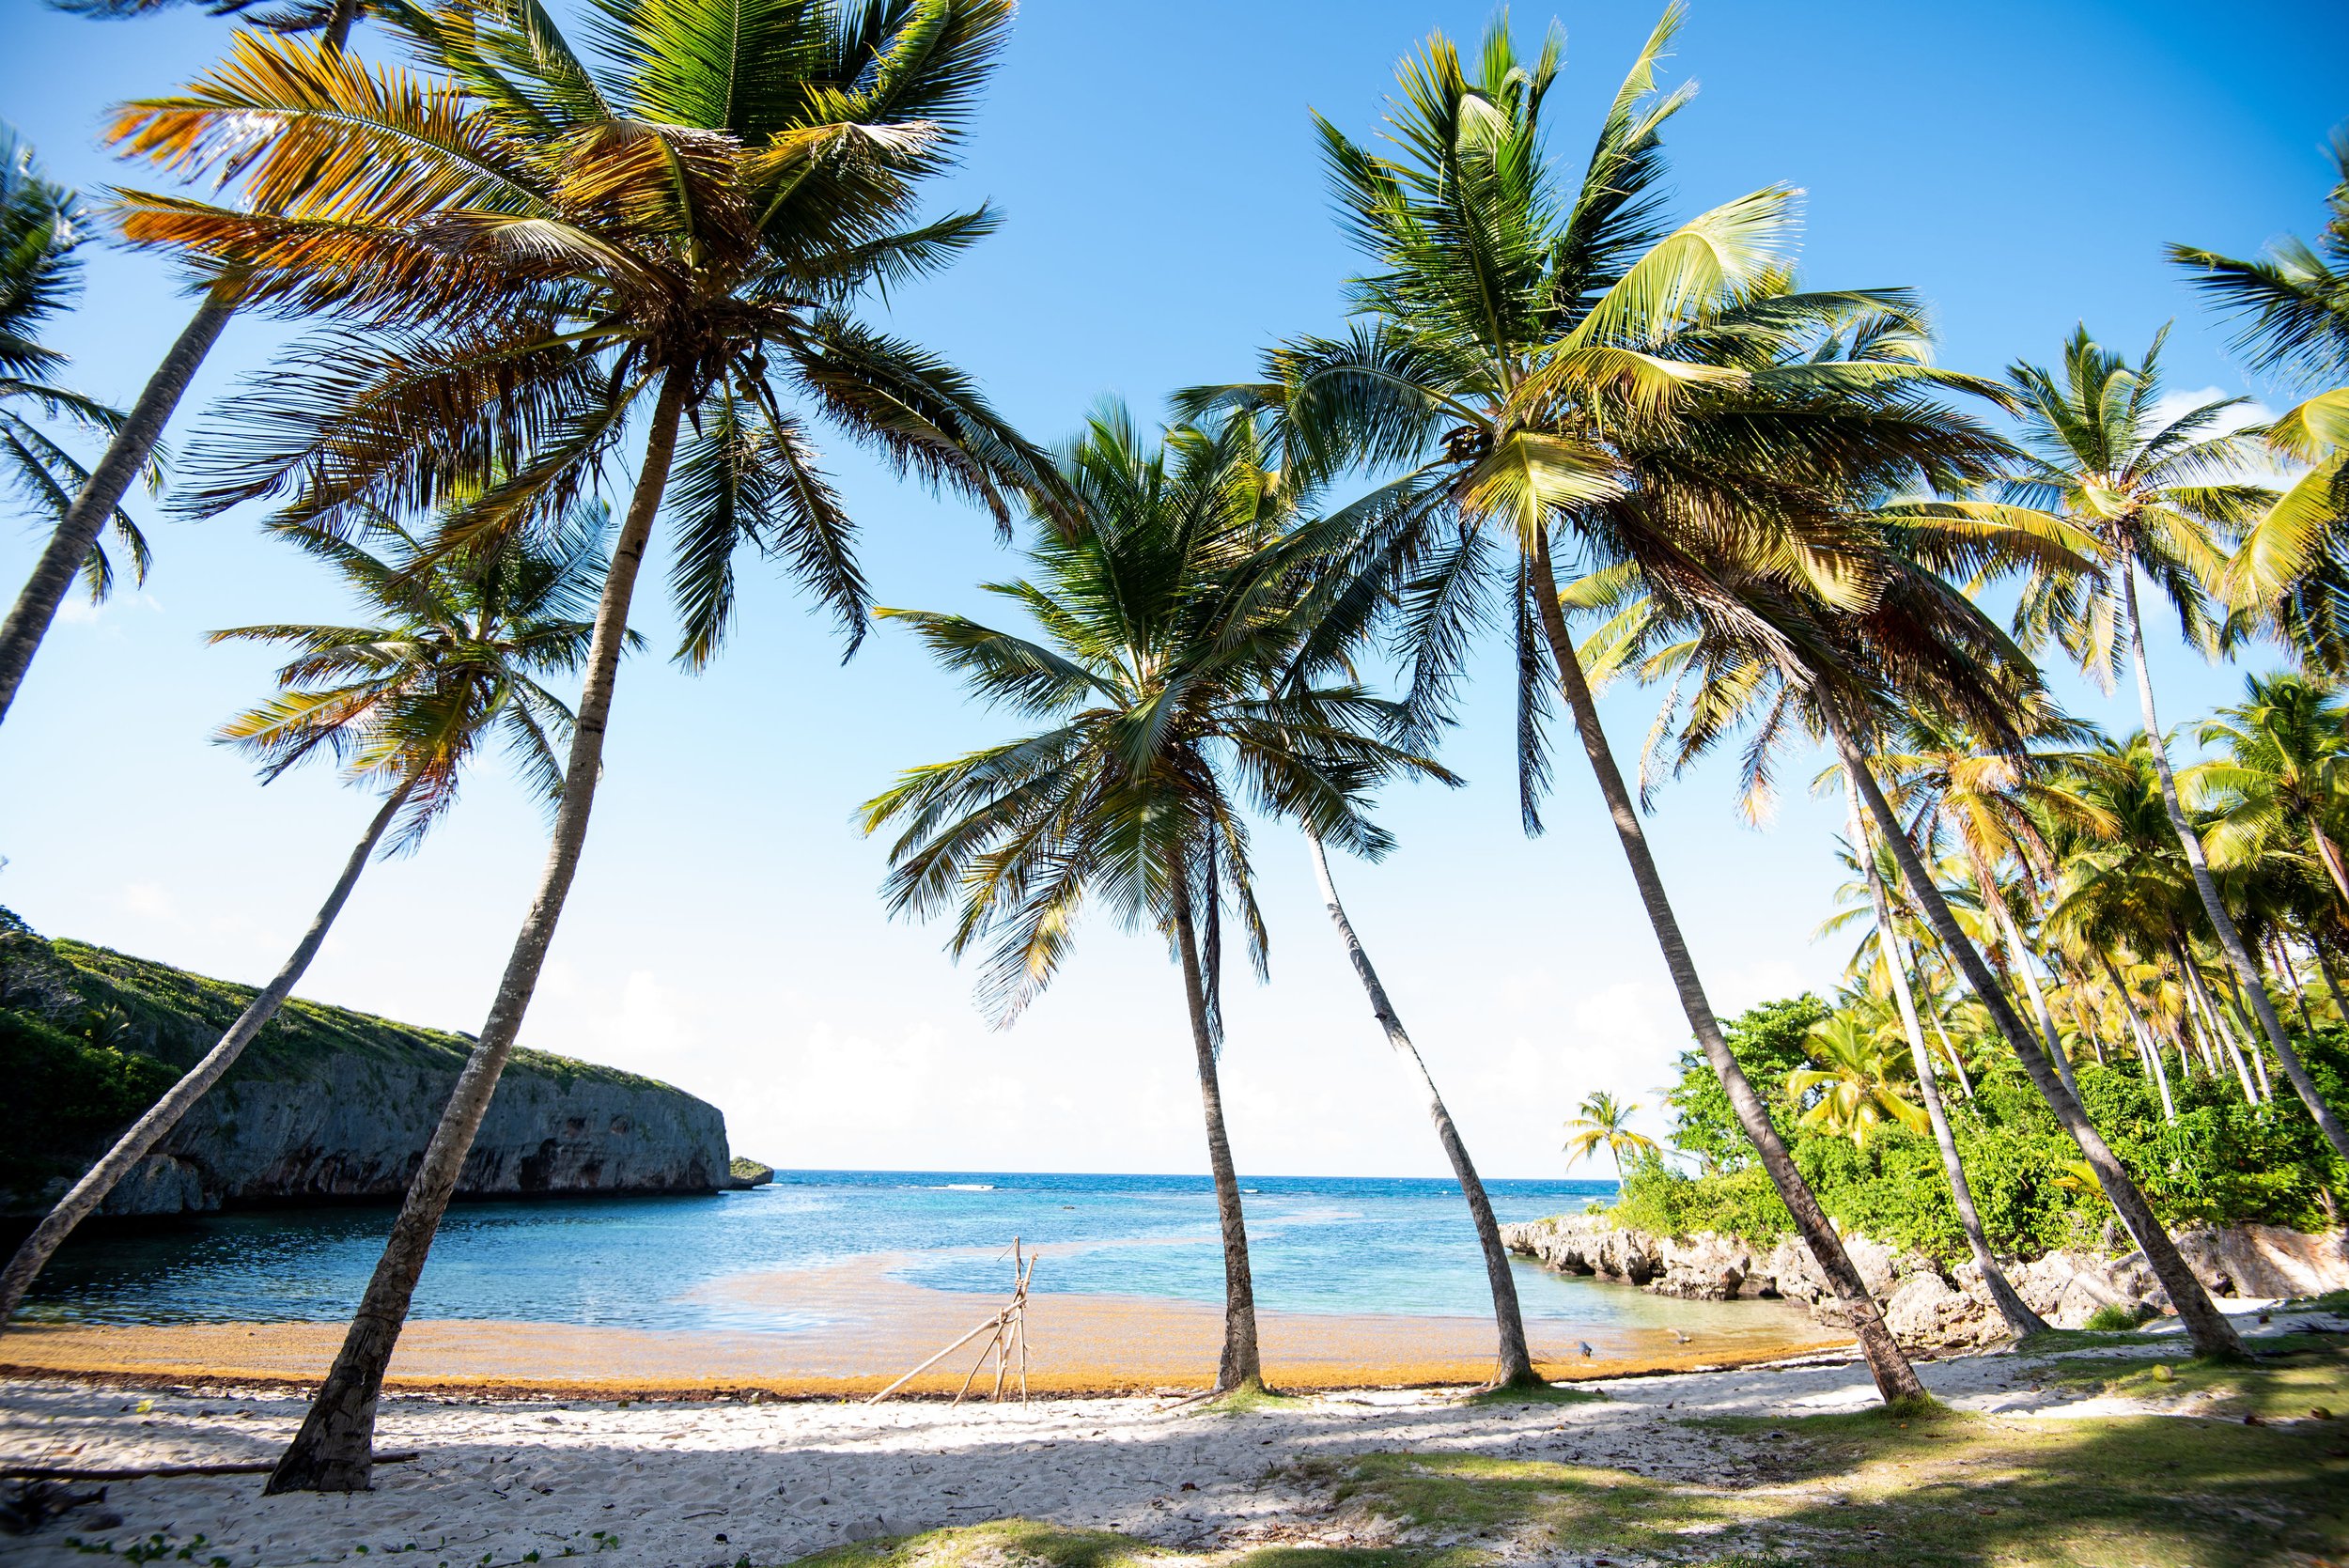 beach and palm trees in the Dominican Republic.jpg